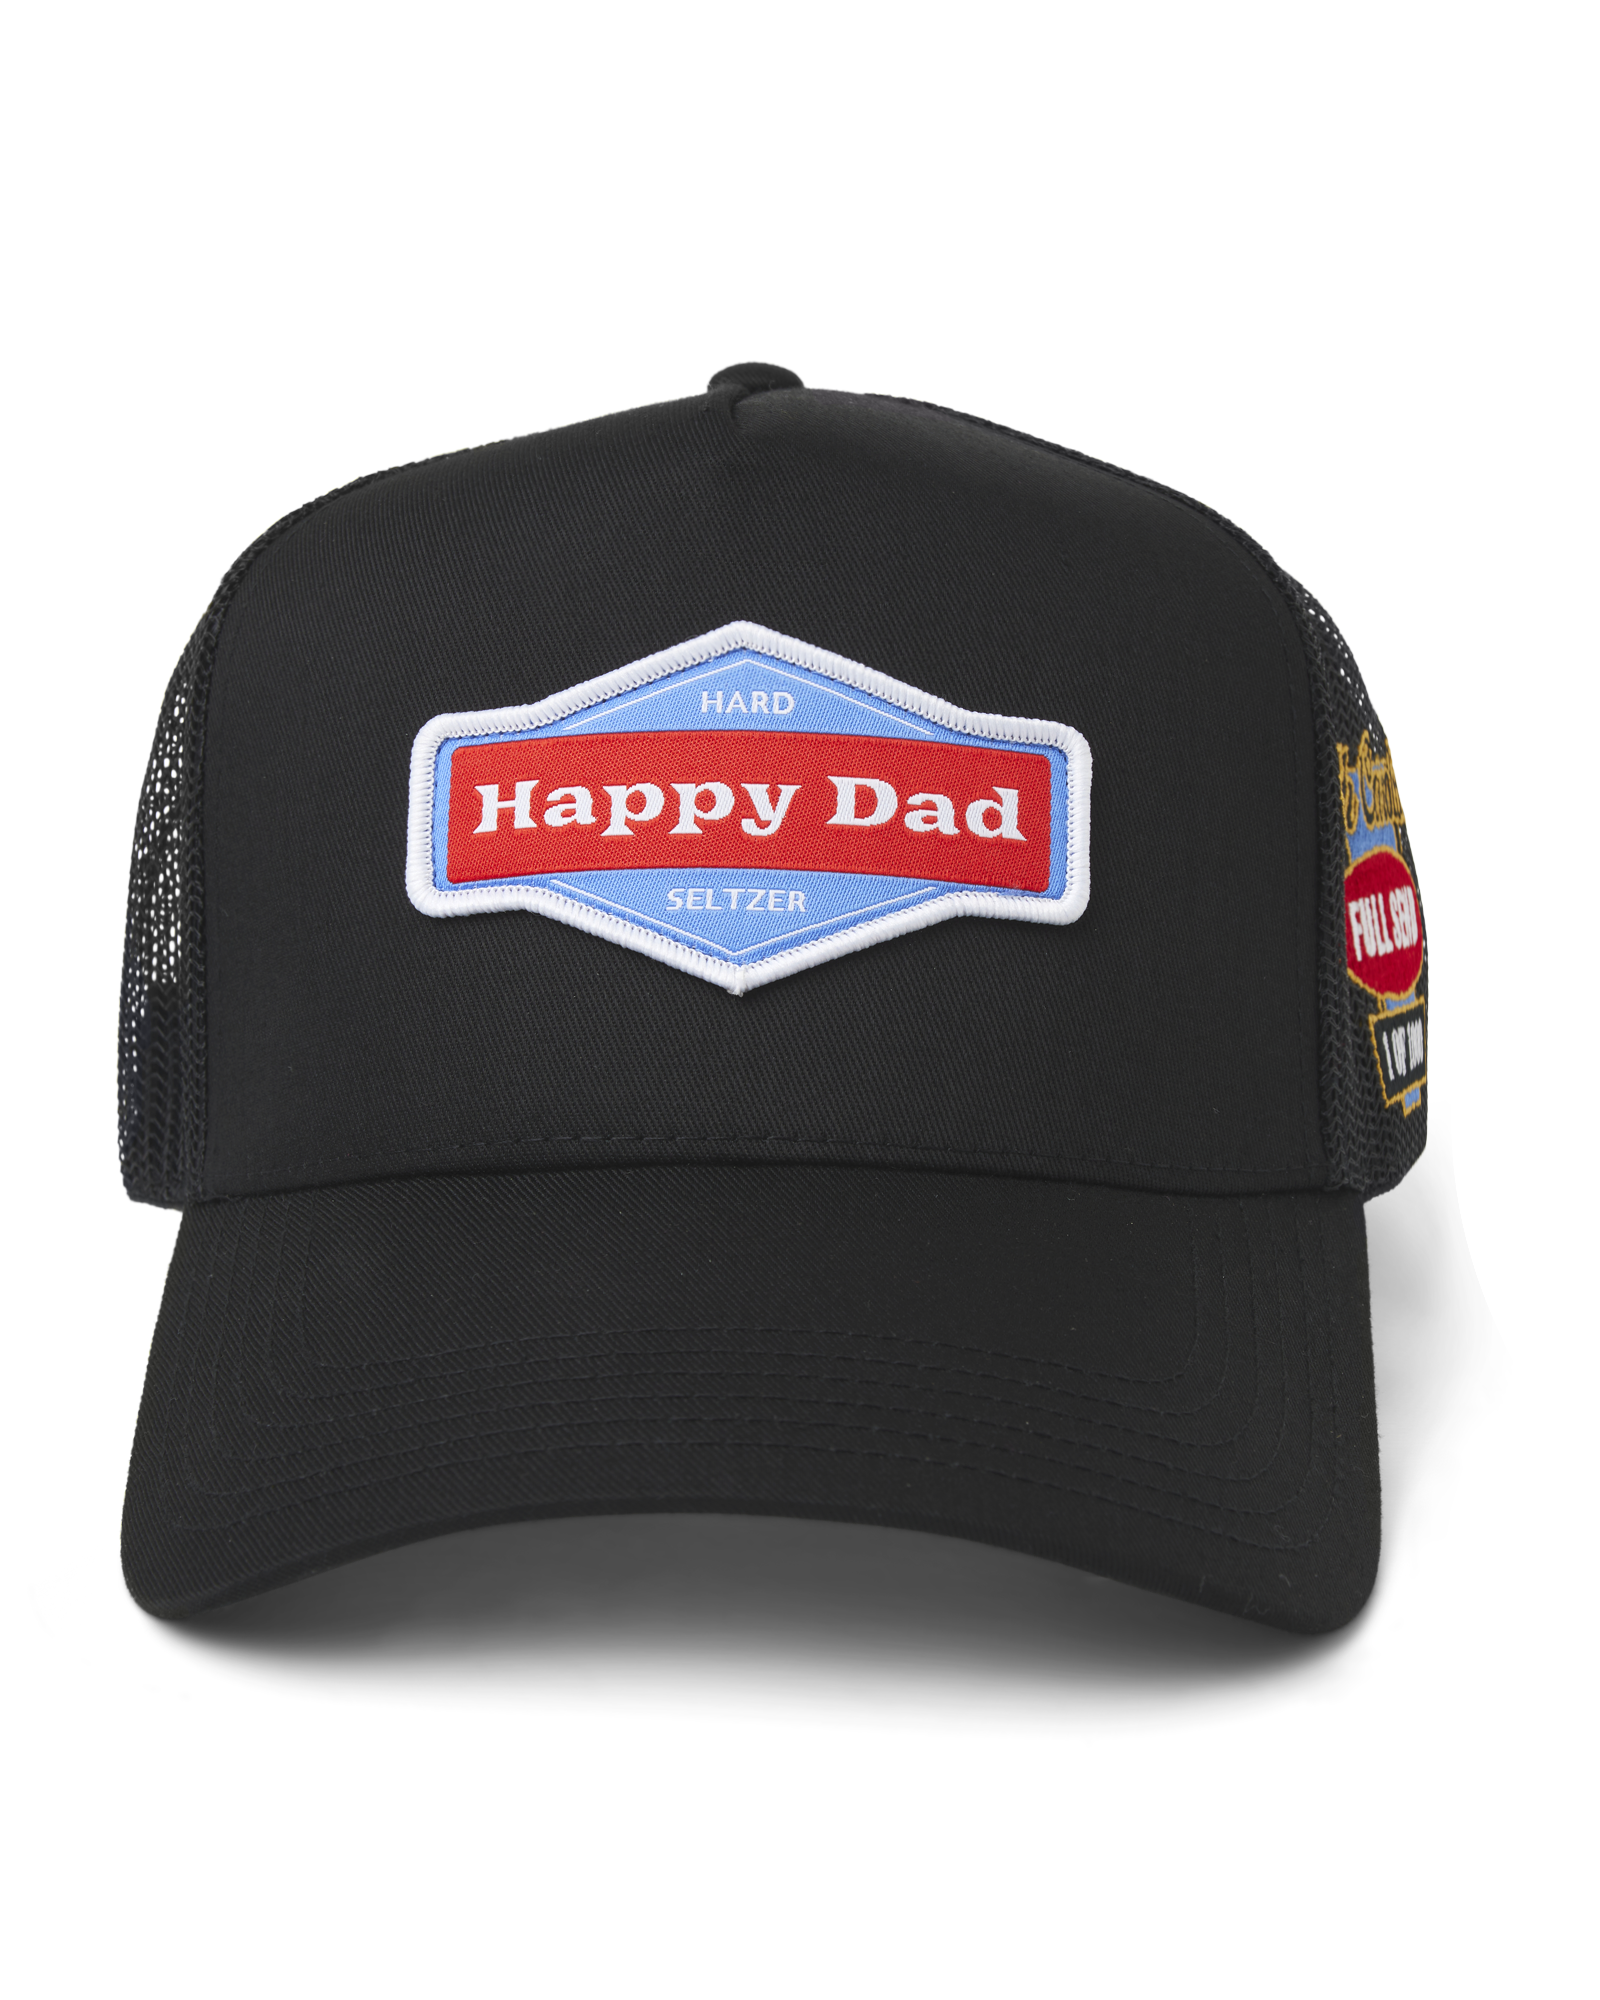 (Limited) Tennessee - Happy Dad State Trucker Hat 1 of 1000